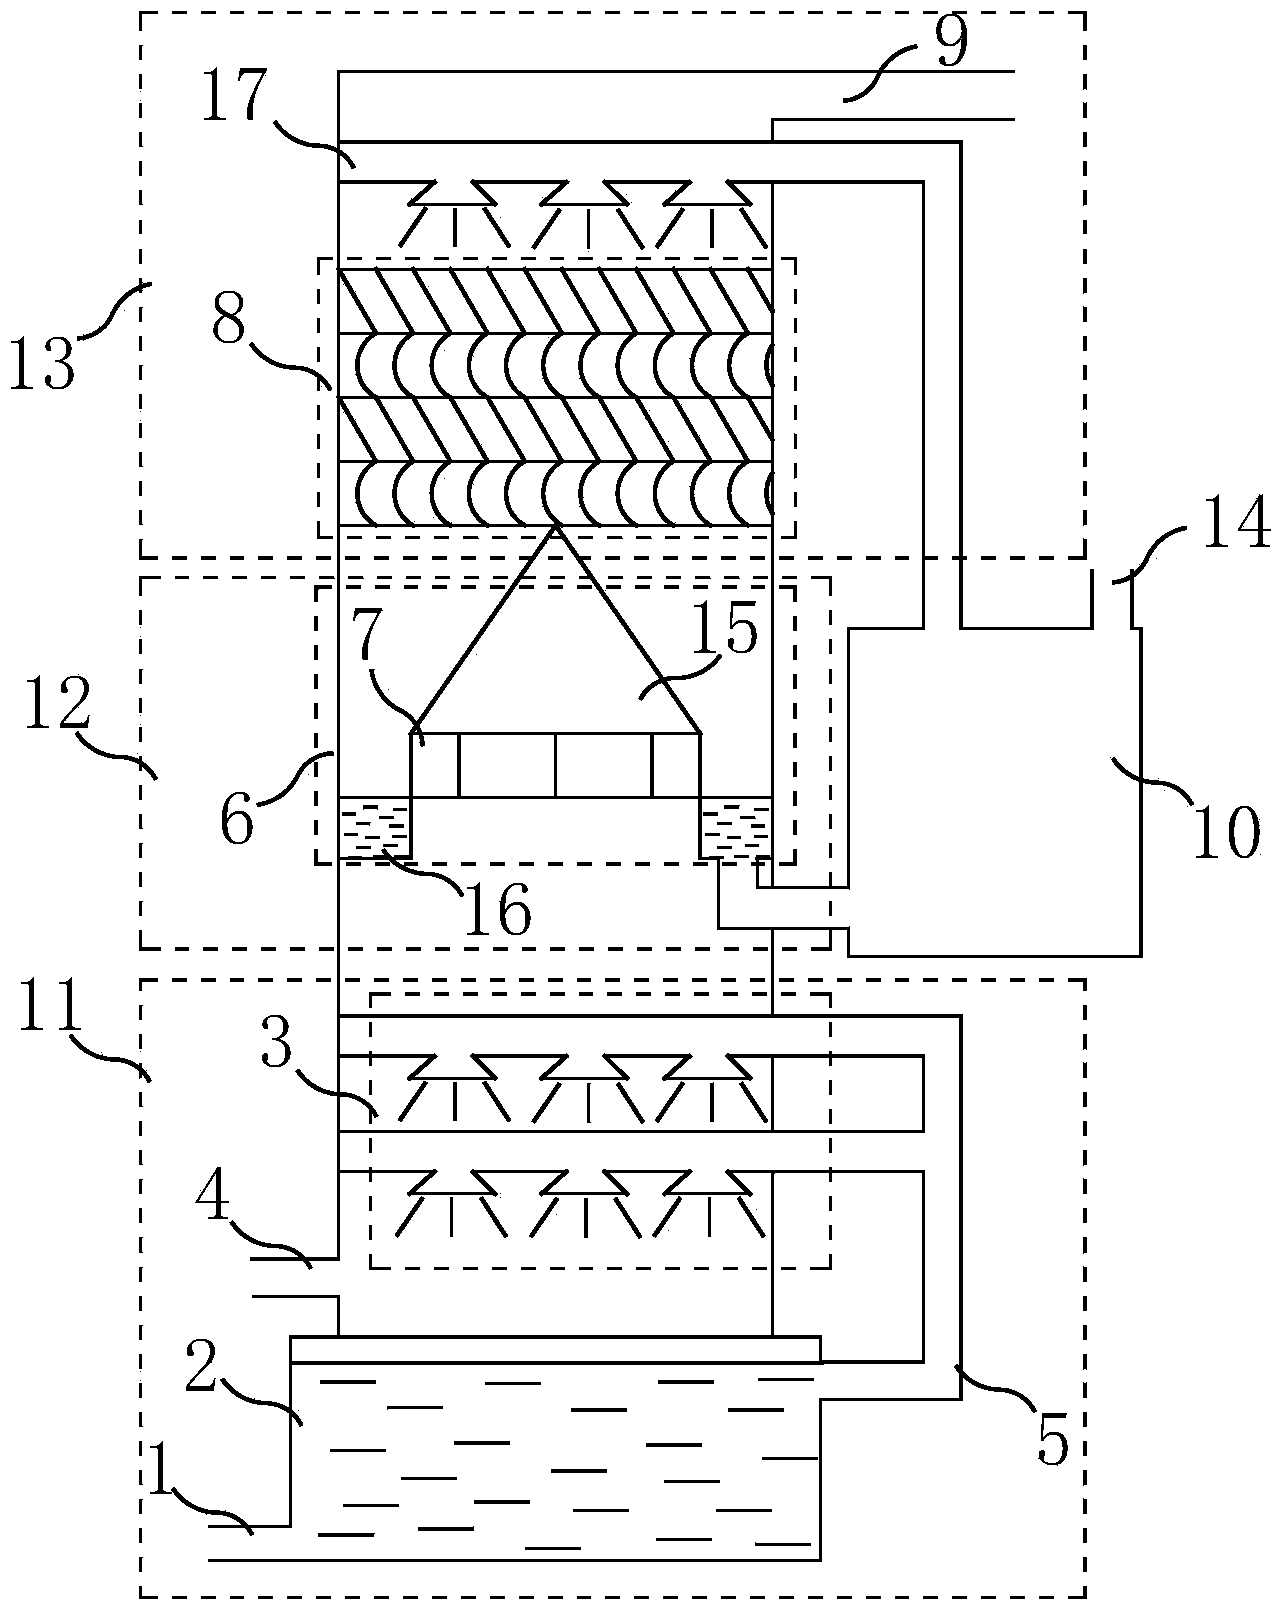 Two-section bicirculating spraying and padding composite absorption tower